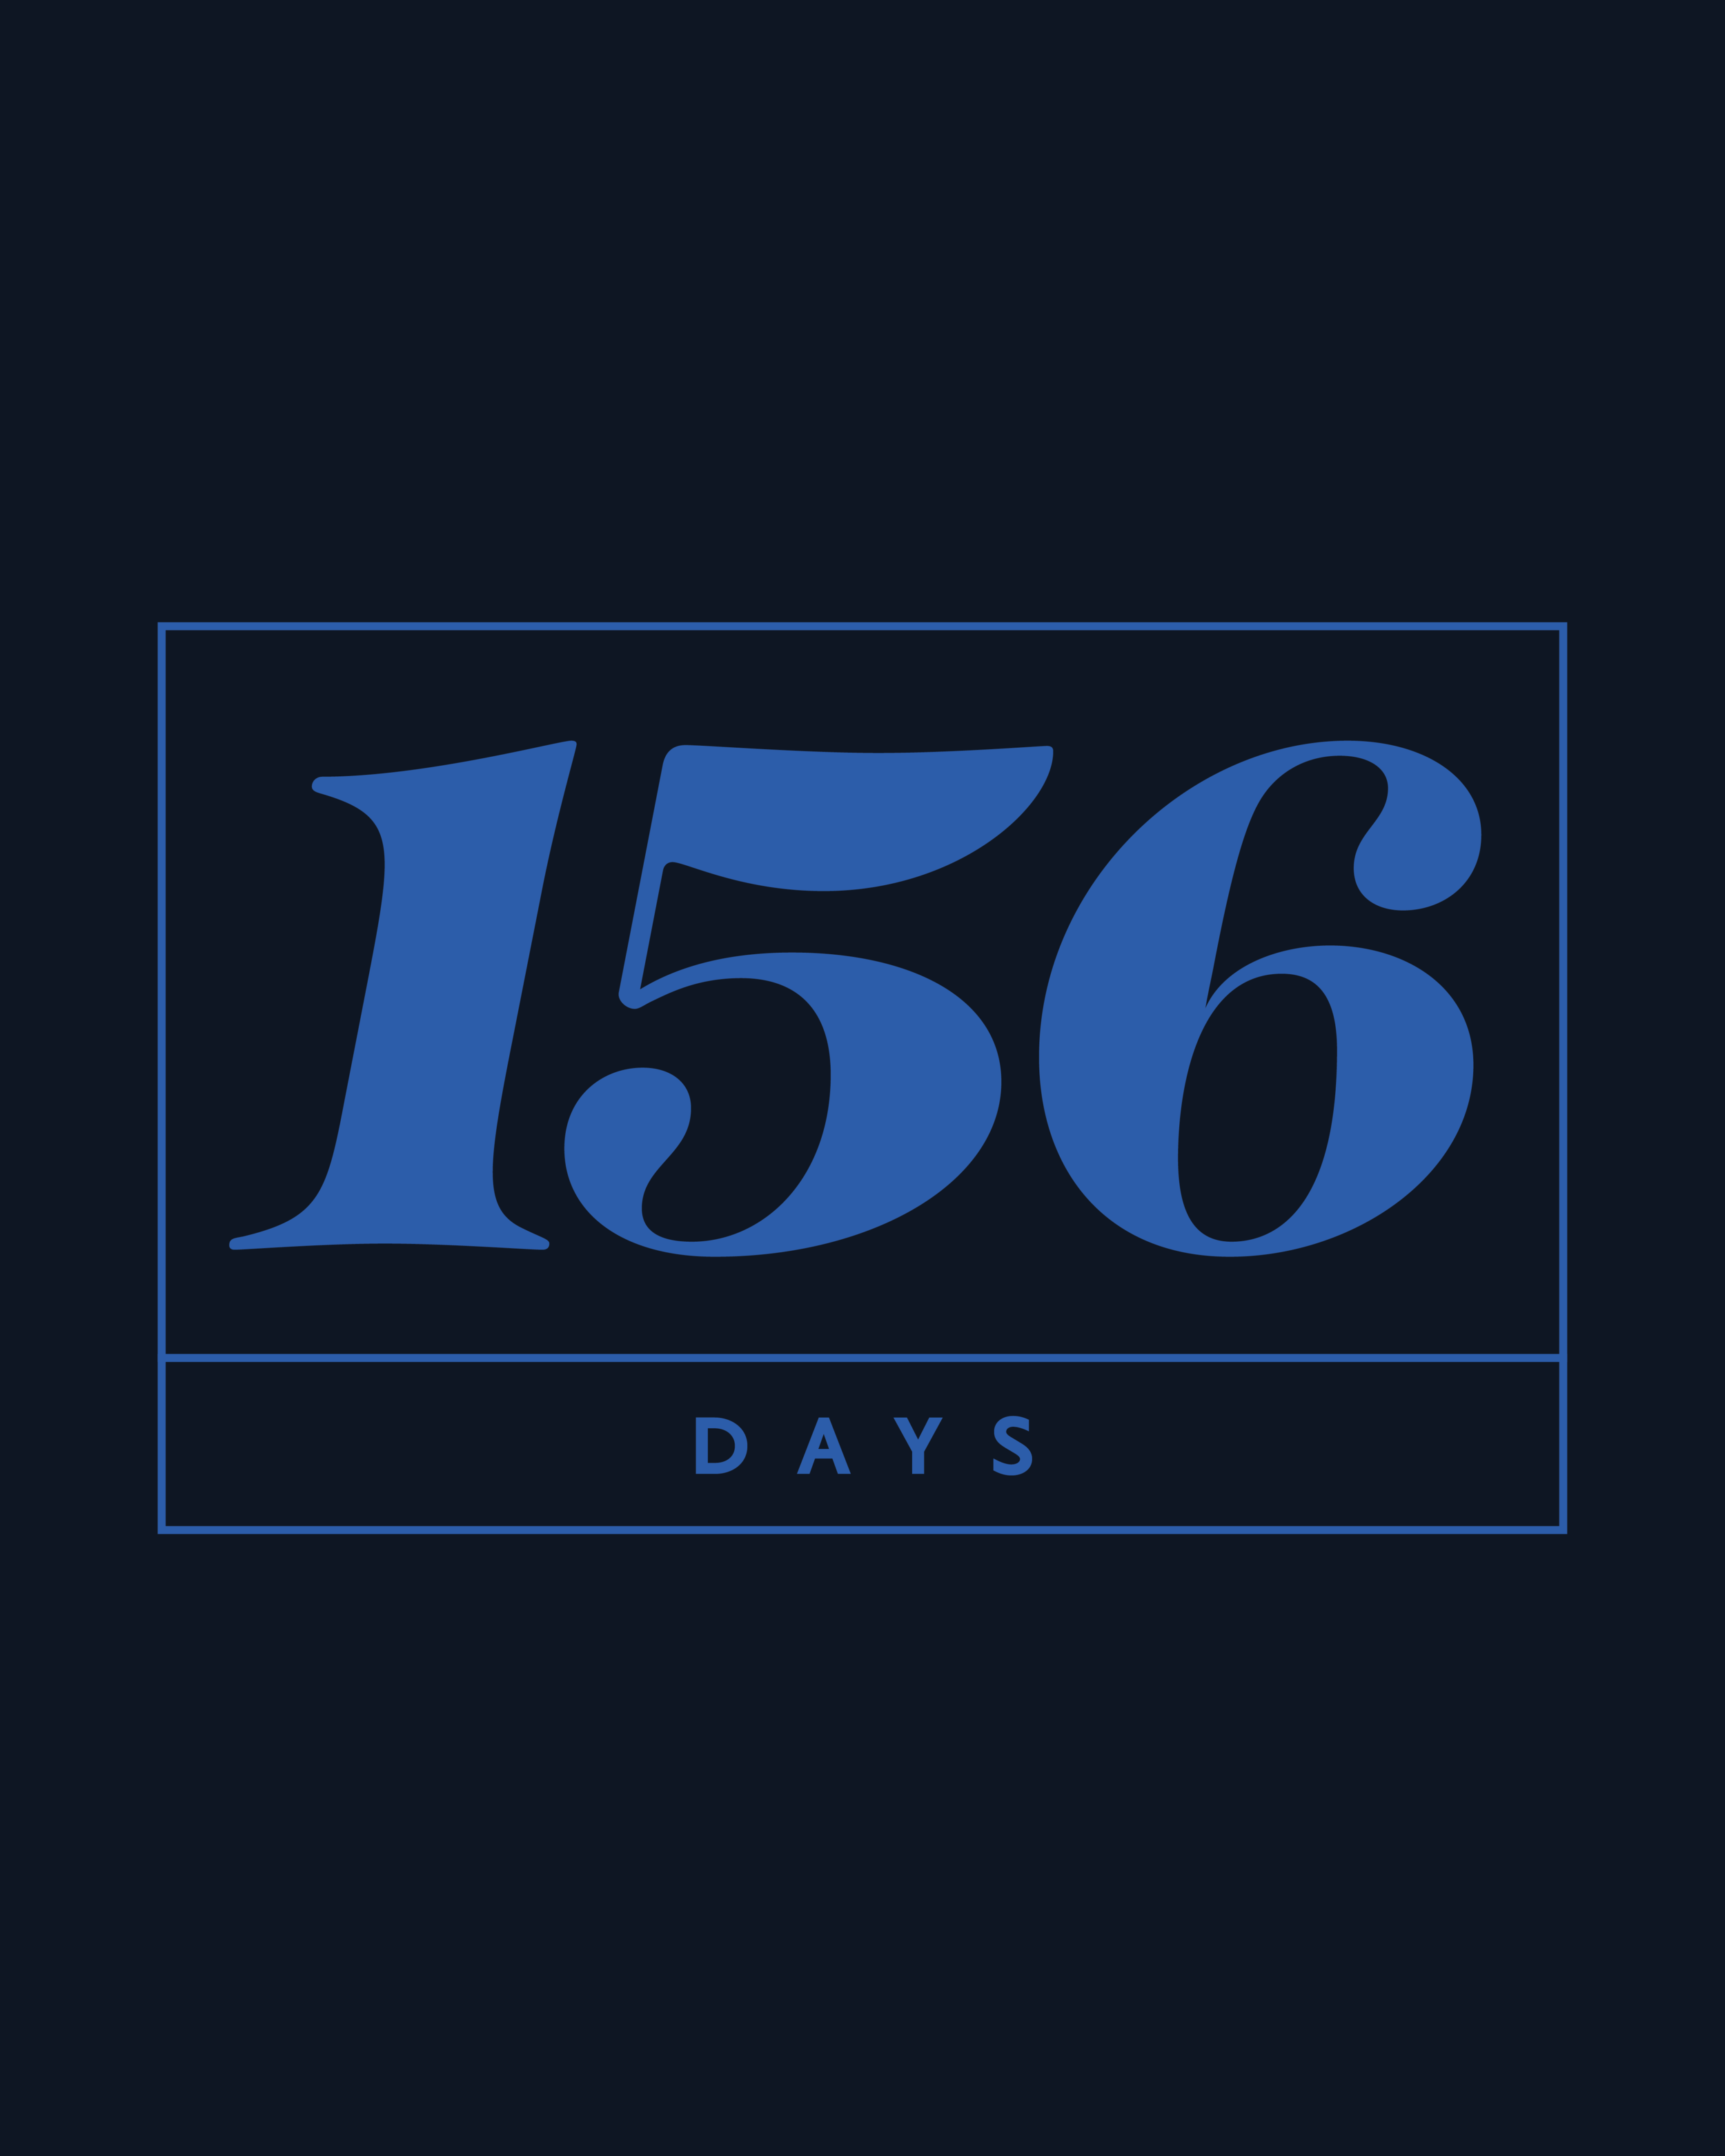  Daily countdown for event promotion with text “156 Days”. 